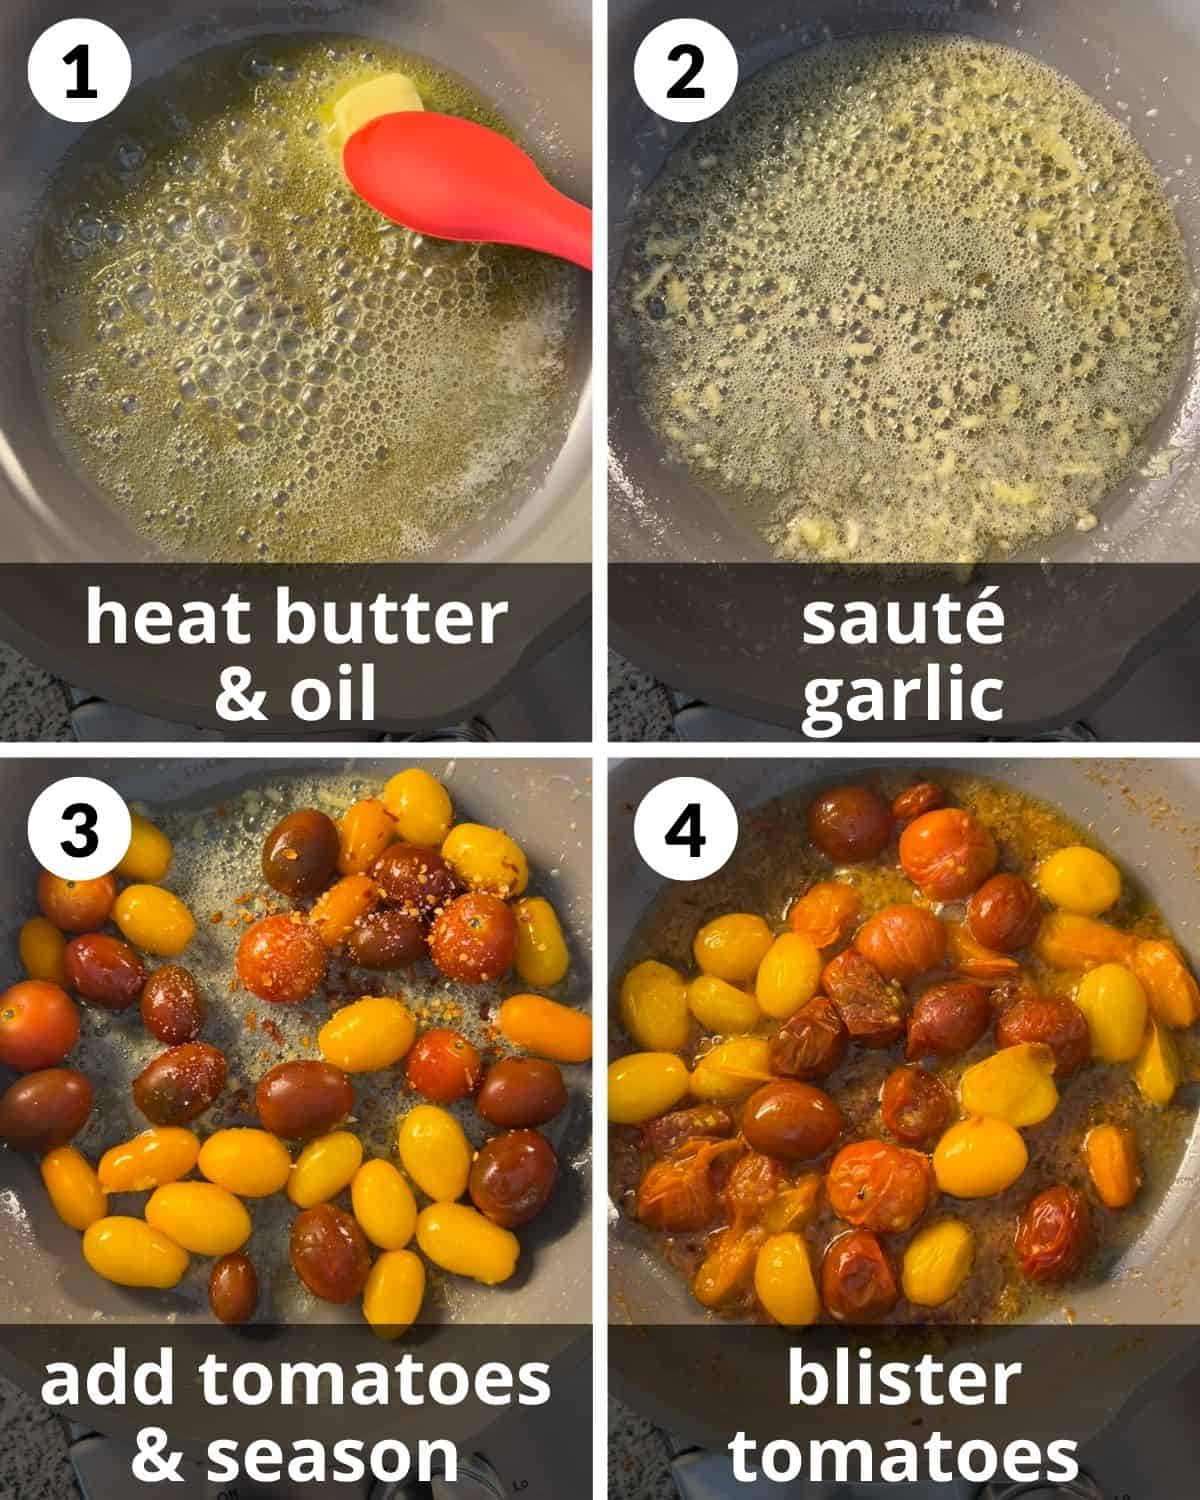 A 4 photo collage showing sauteeing the garlic and blistering the tomatoes.